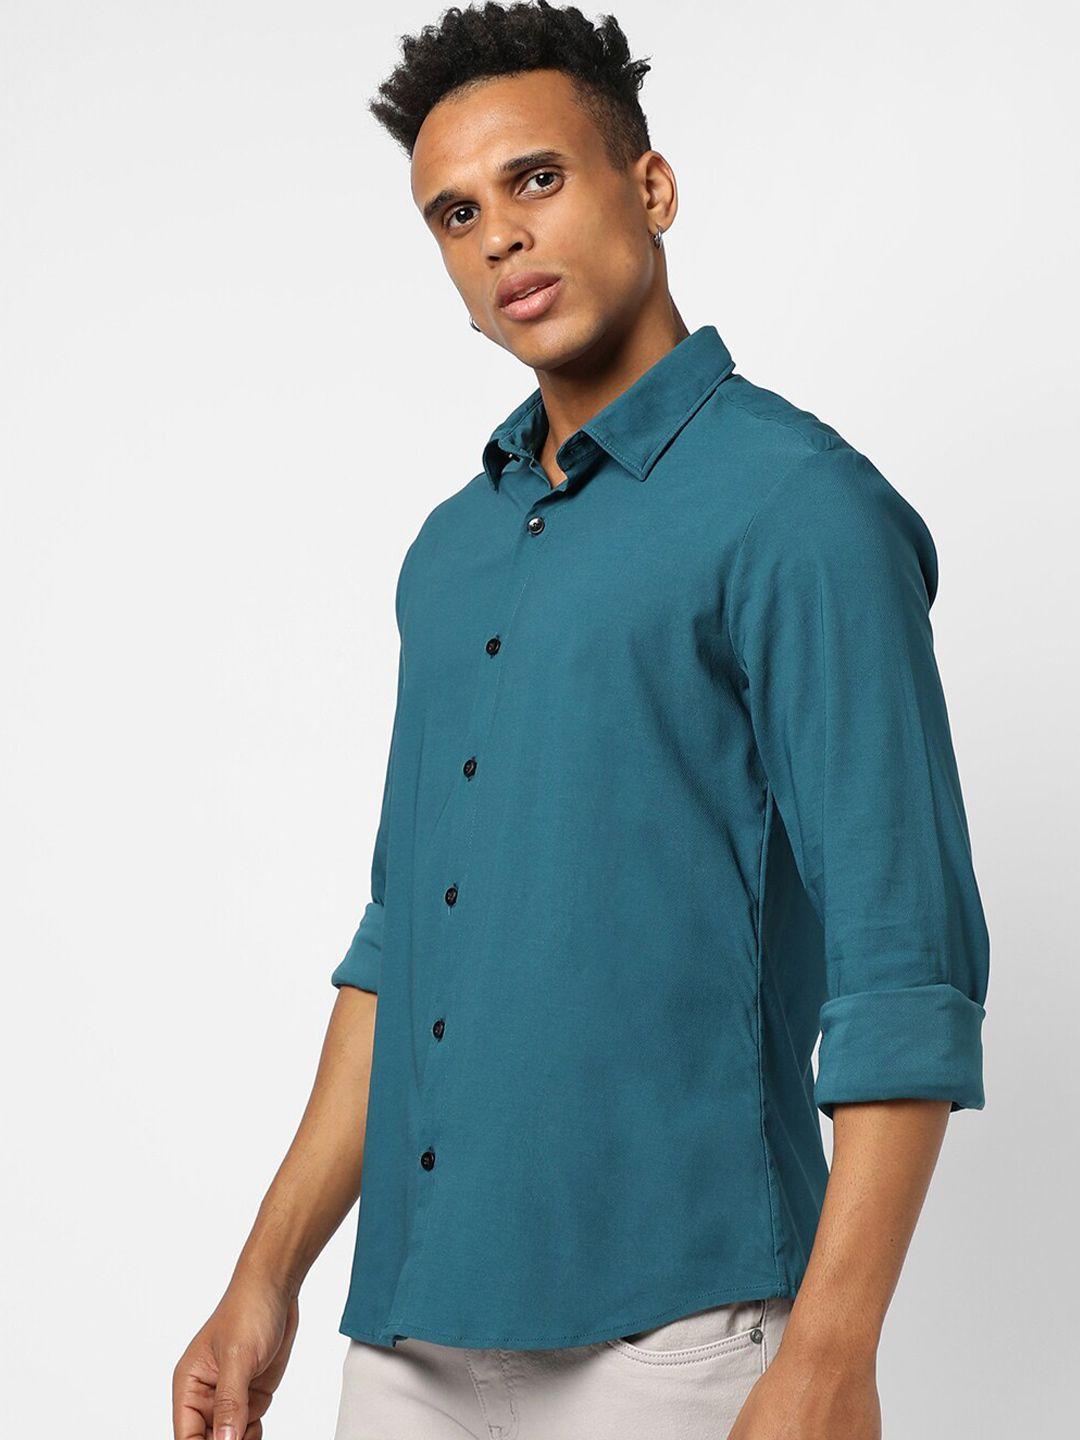 campus sutra men solid classic casual shirt